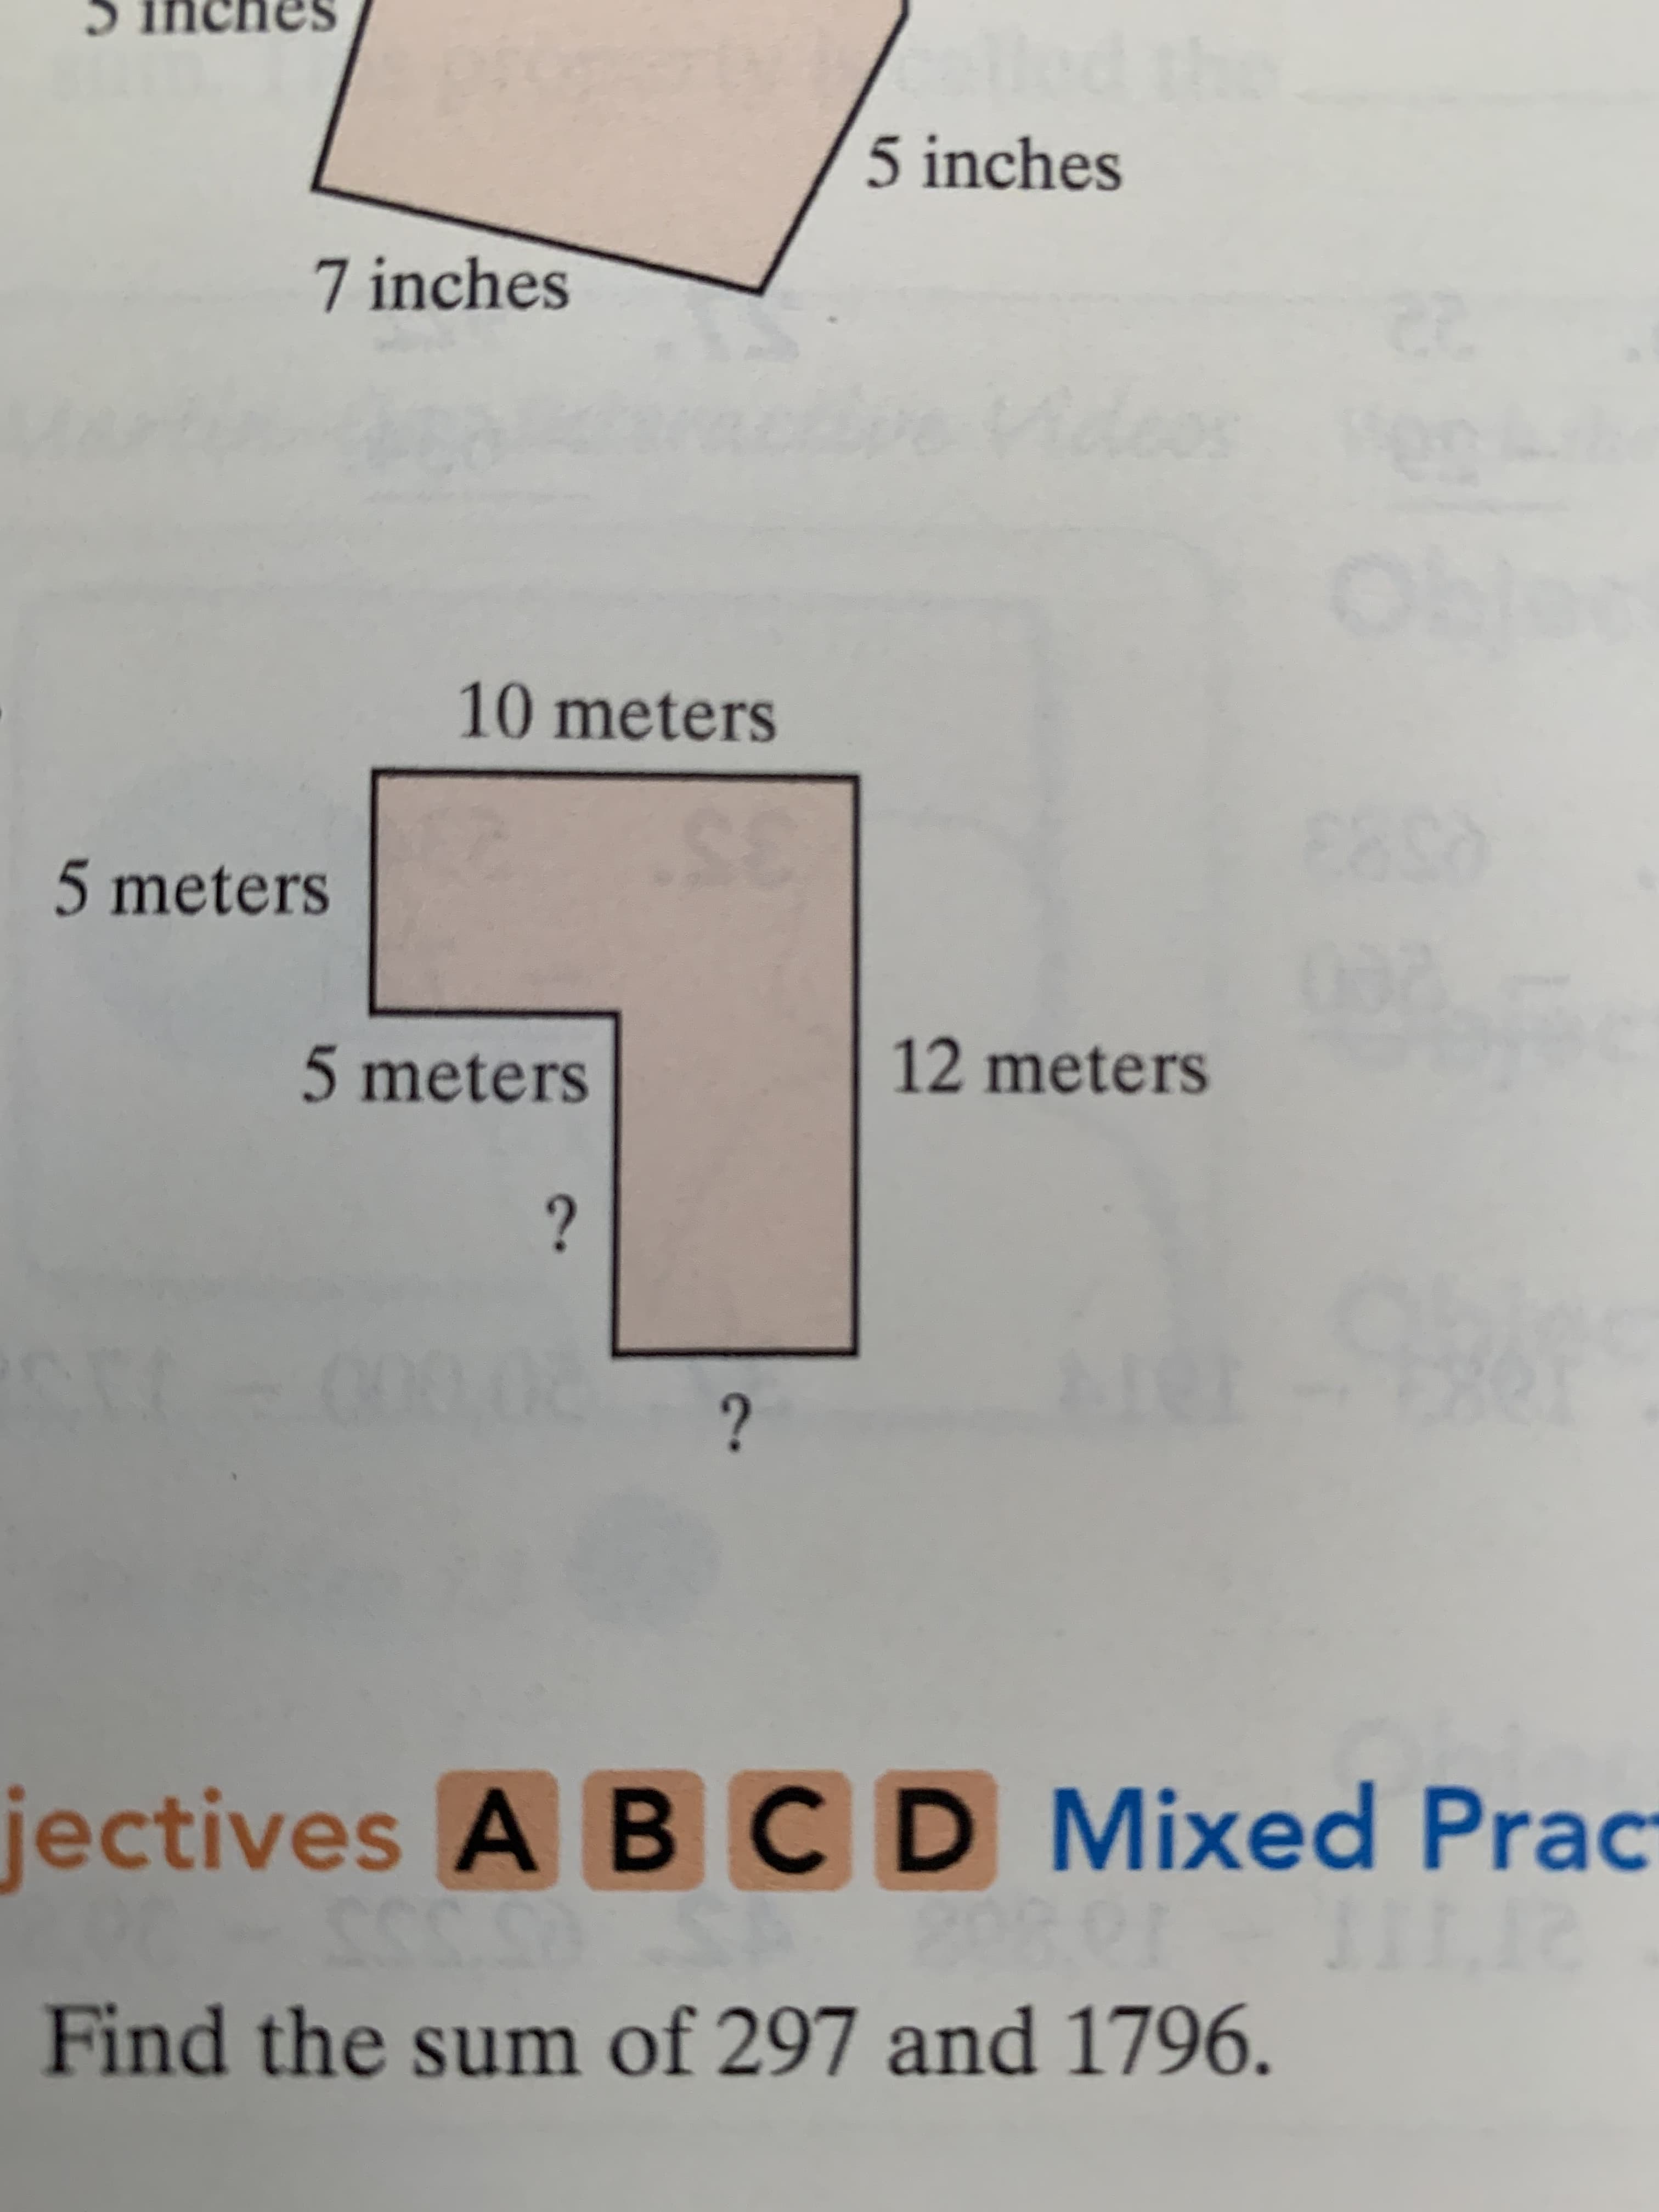 5 inches
7 inches
10 meters
&9
5 meters
12 meters
5 meters
?
?
jectives A BCD Mixed Prac
2TT
Find the sum of 297 and 1796.
8
